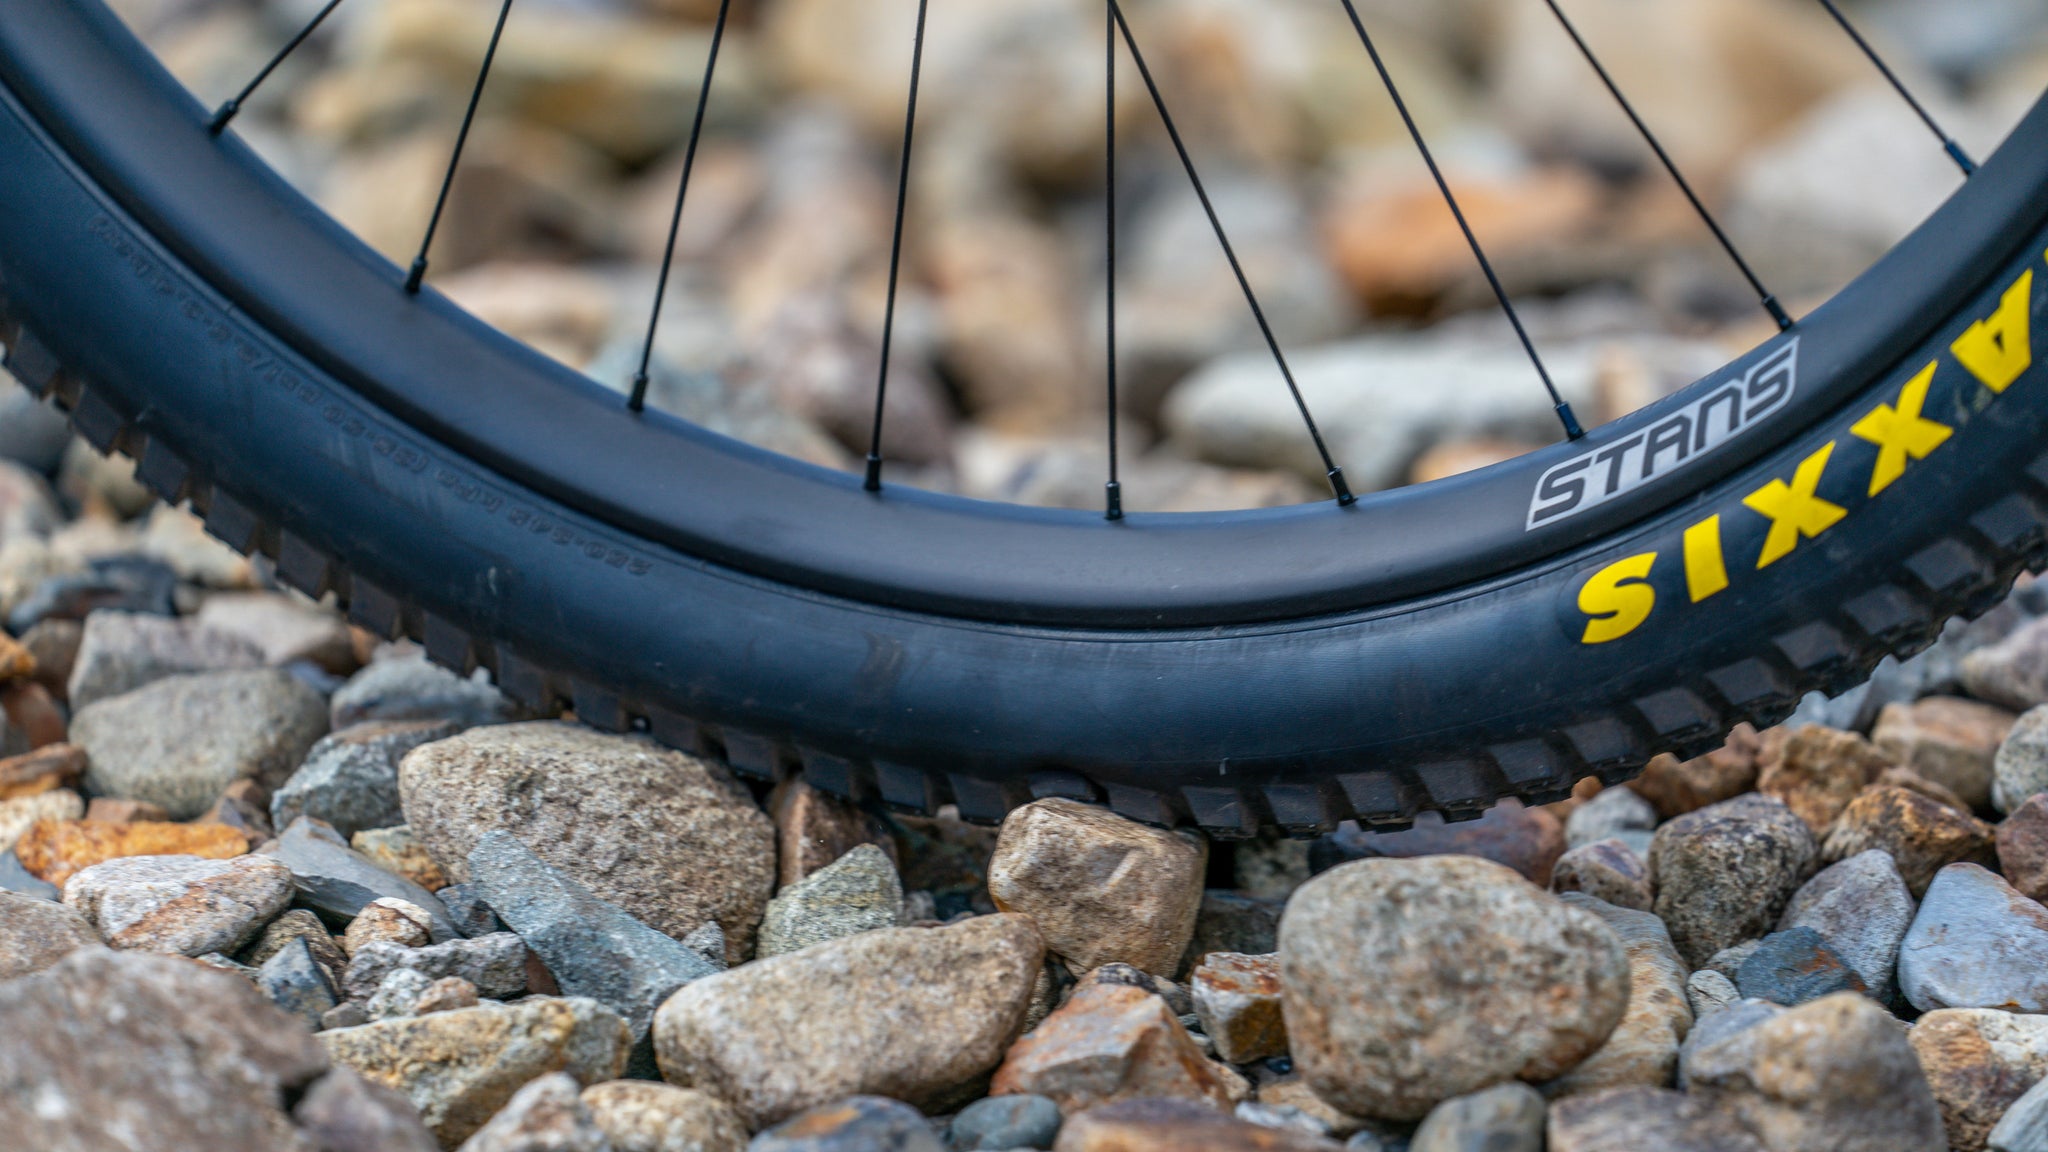 Tubeless tire and wheel